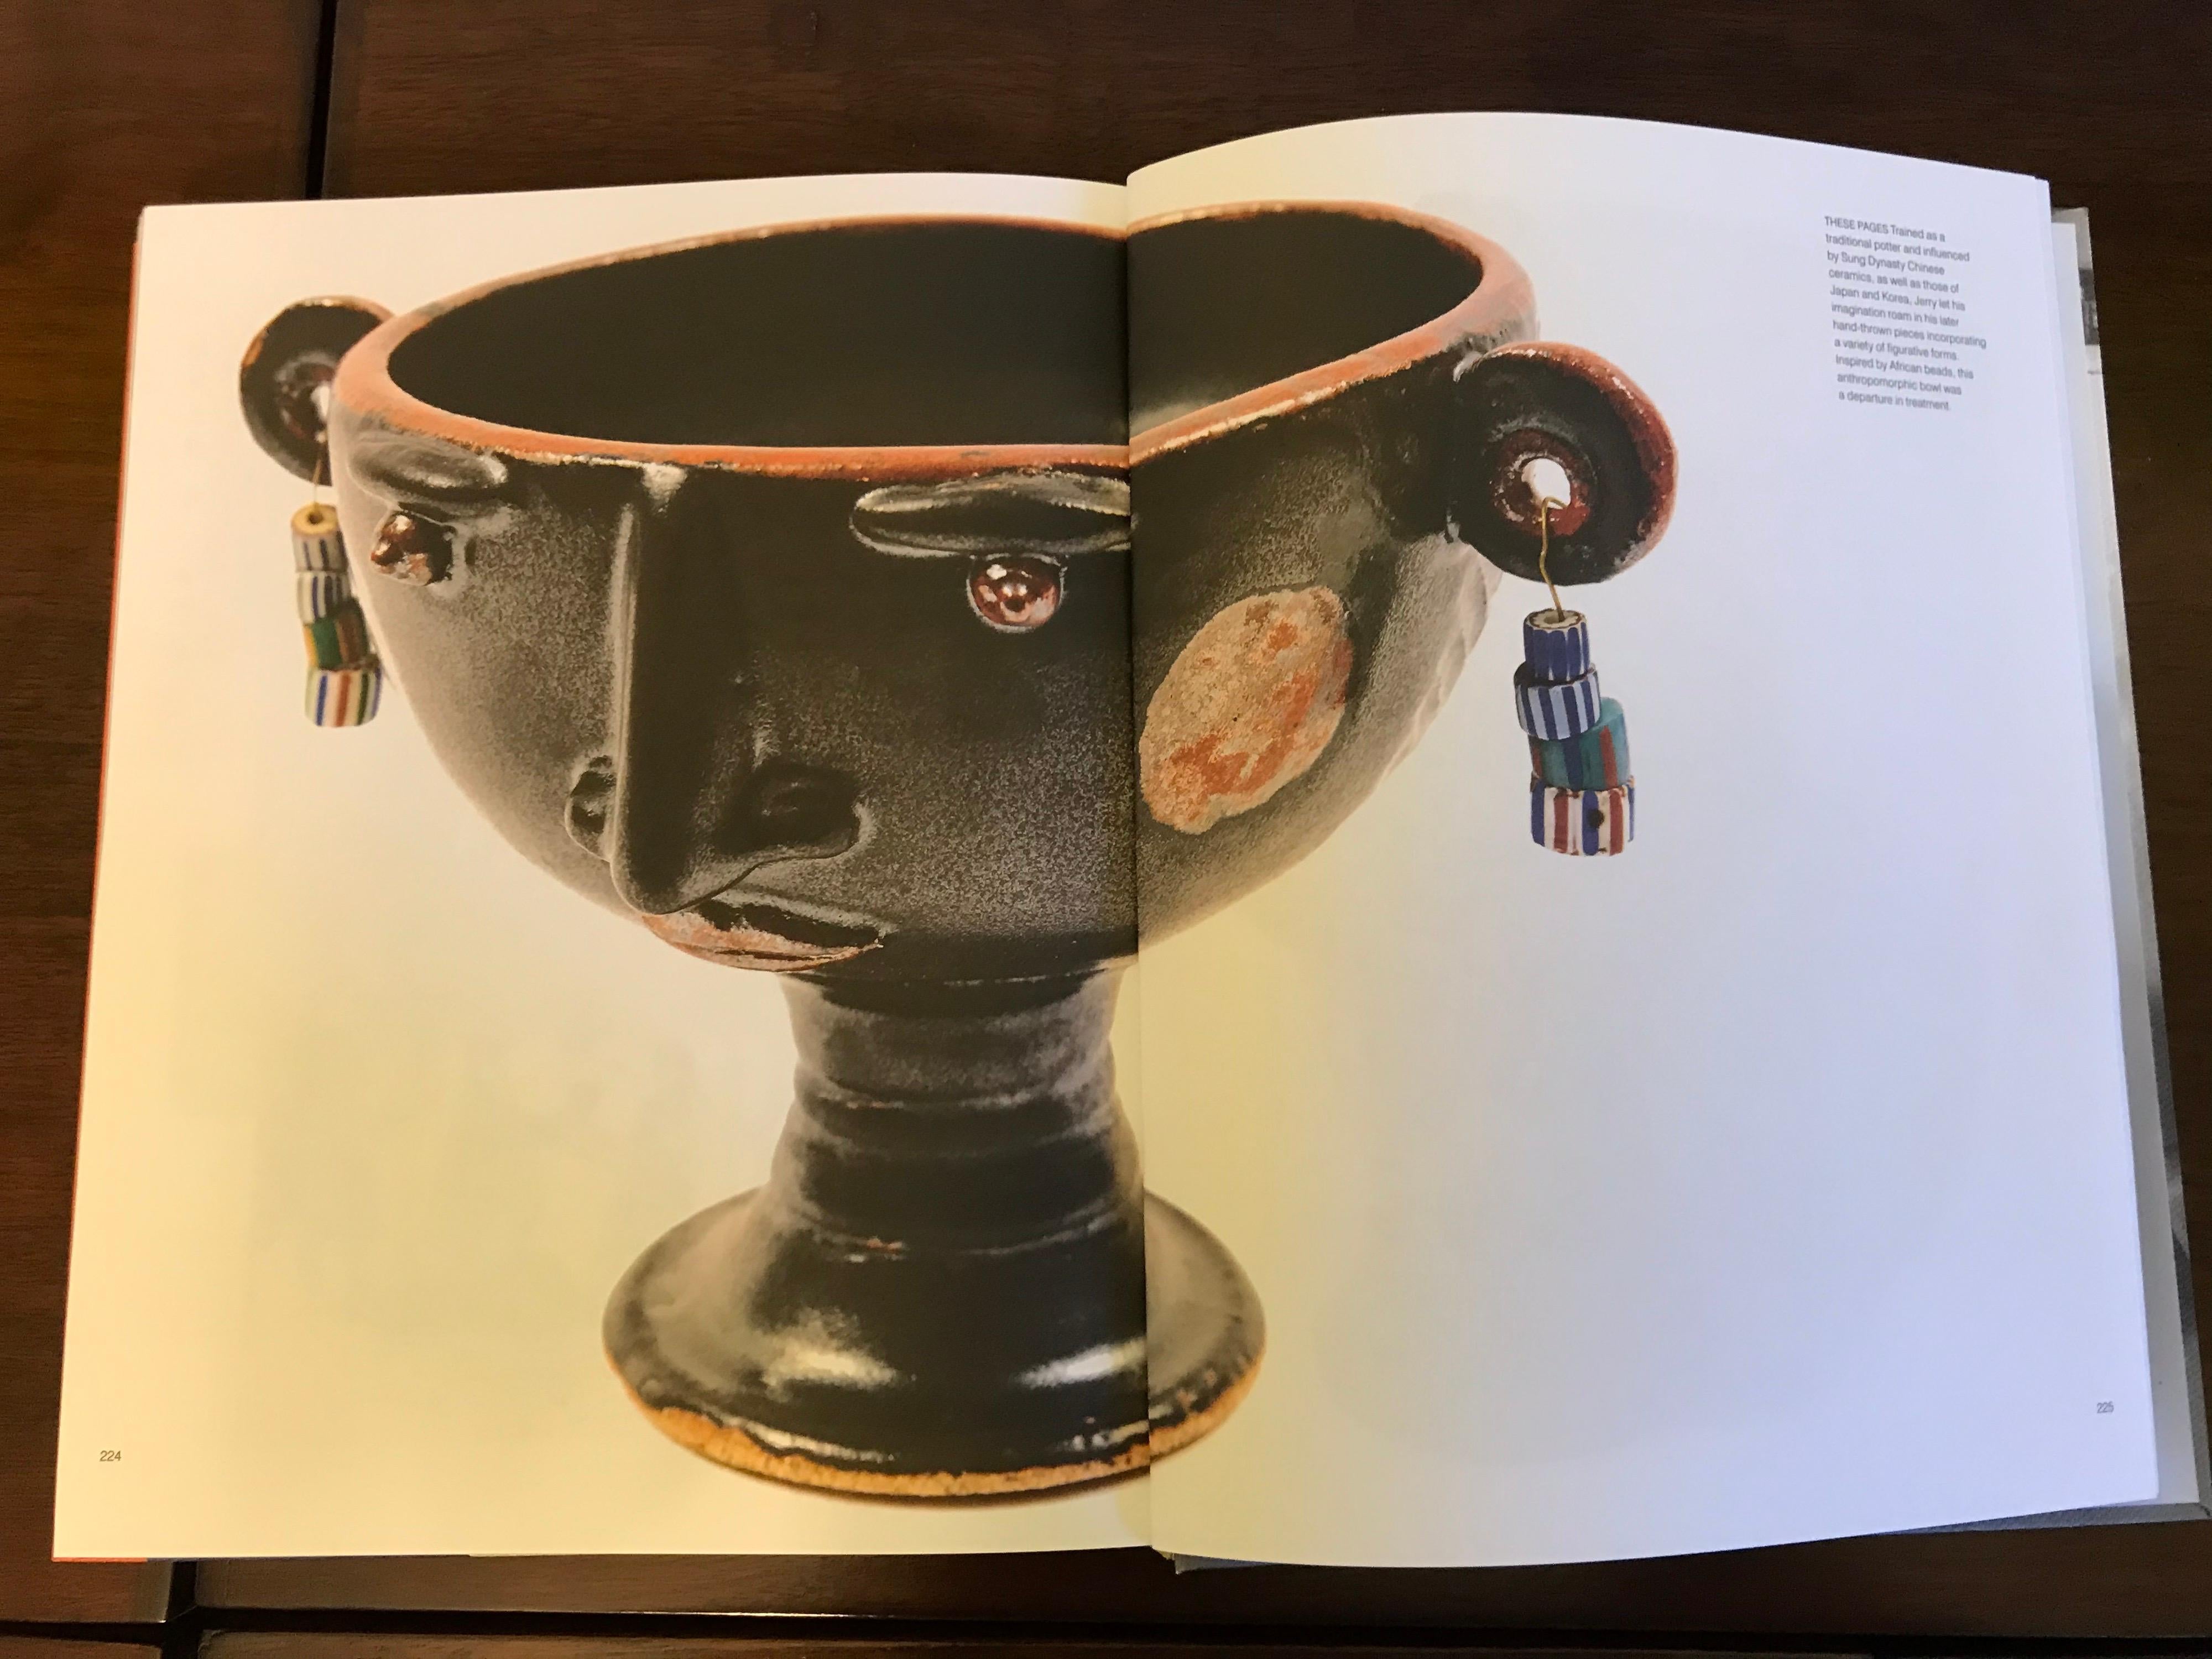 From the estate of the late Jerome and Evelyn Ackerman.
A whimsical chalice design.
It appears that he made only two or more of these. This one and the one pictured in the book.
Wheel thrown pottery with handcrafted embellishments and mat black